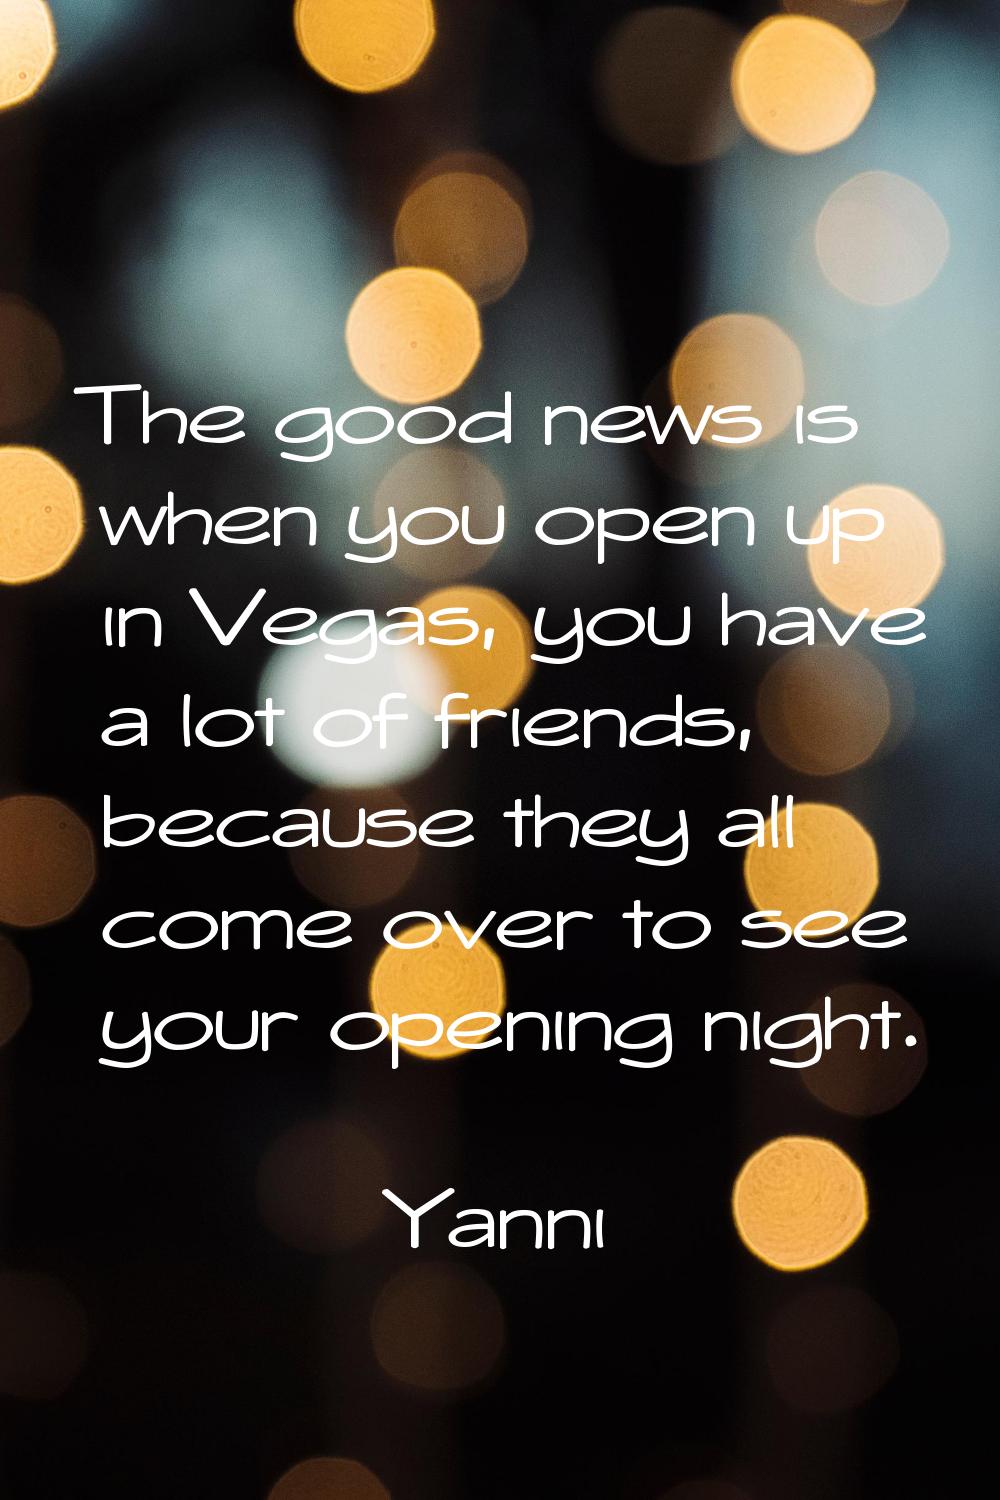 The good news is when you open up in Vegas, you have a lot of friends, because they all come over t